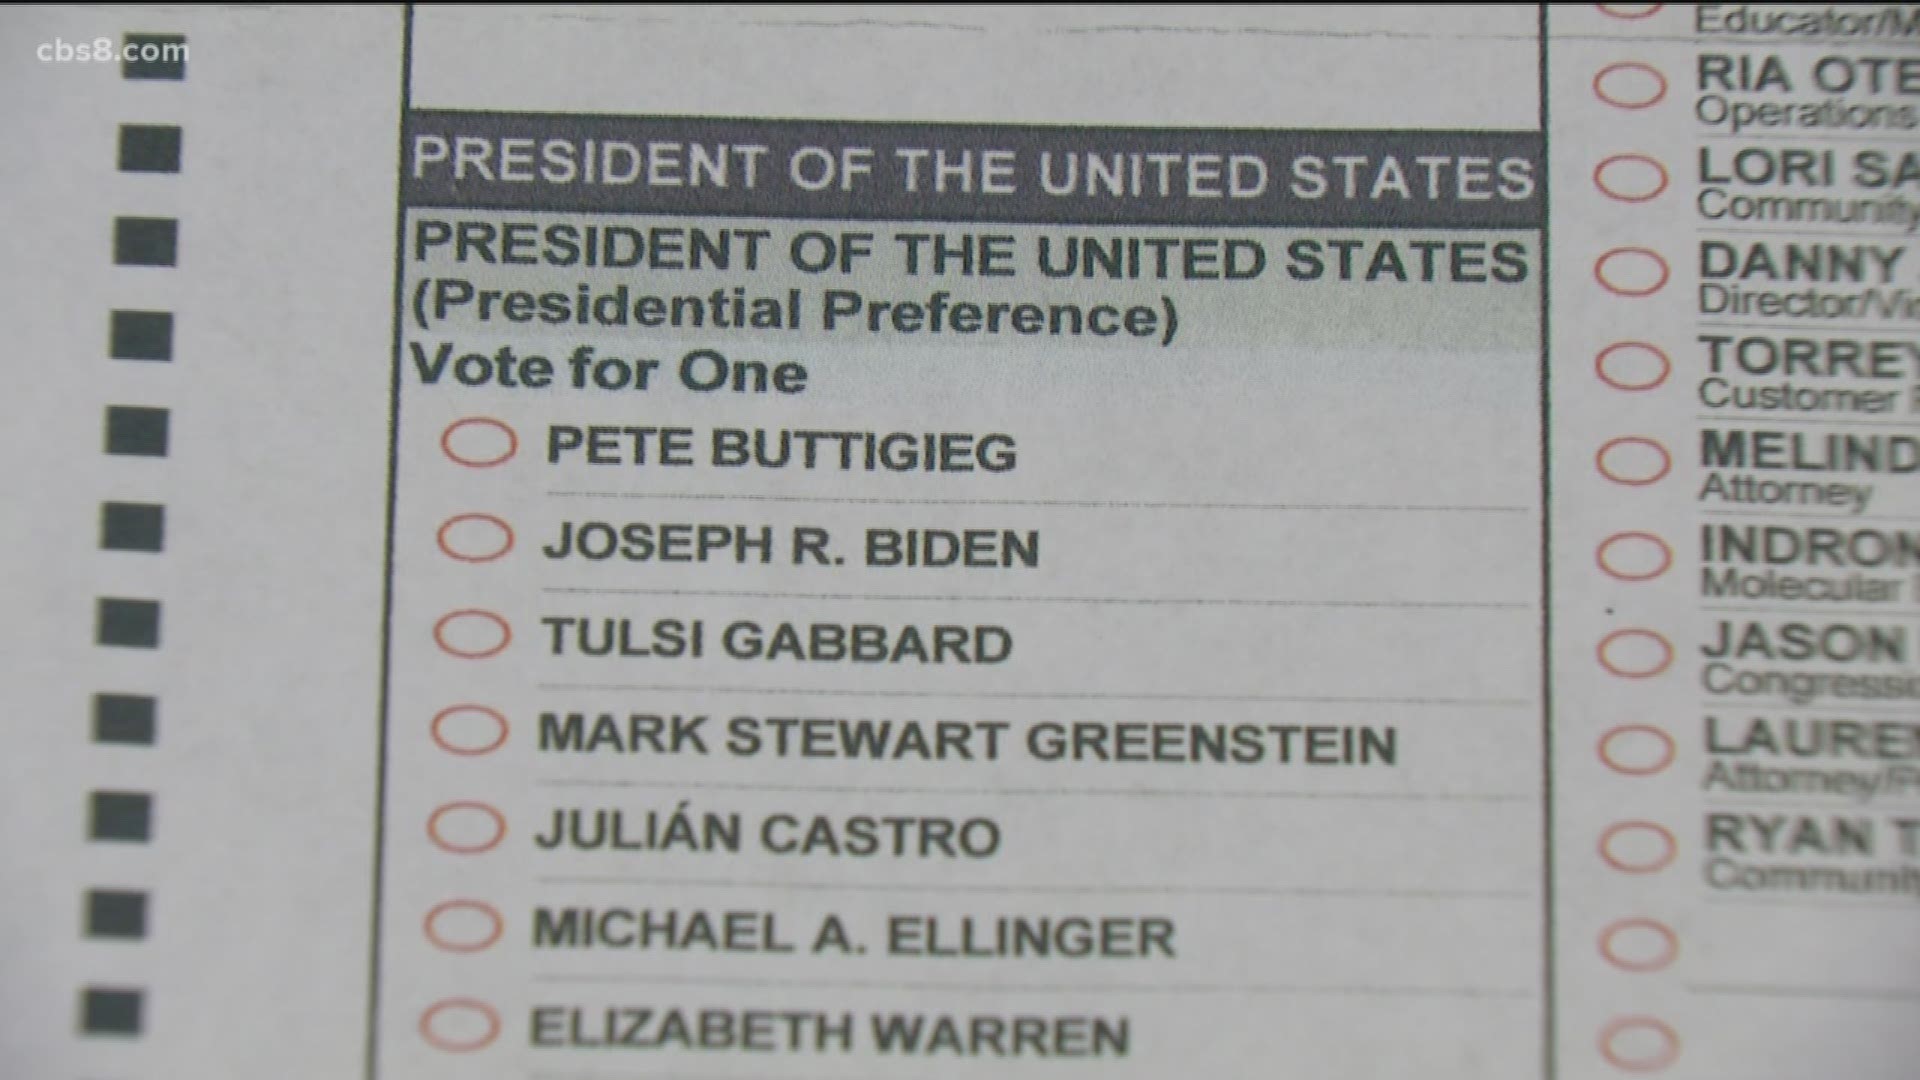 One ballot for a presidential pick lists Pete Buttigieg as first and another shows Joseph Biden as the first name, so why aren't the names in alphabetical order?